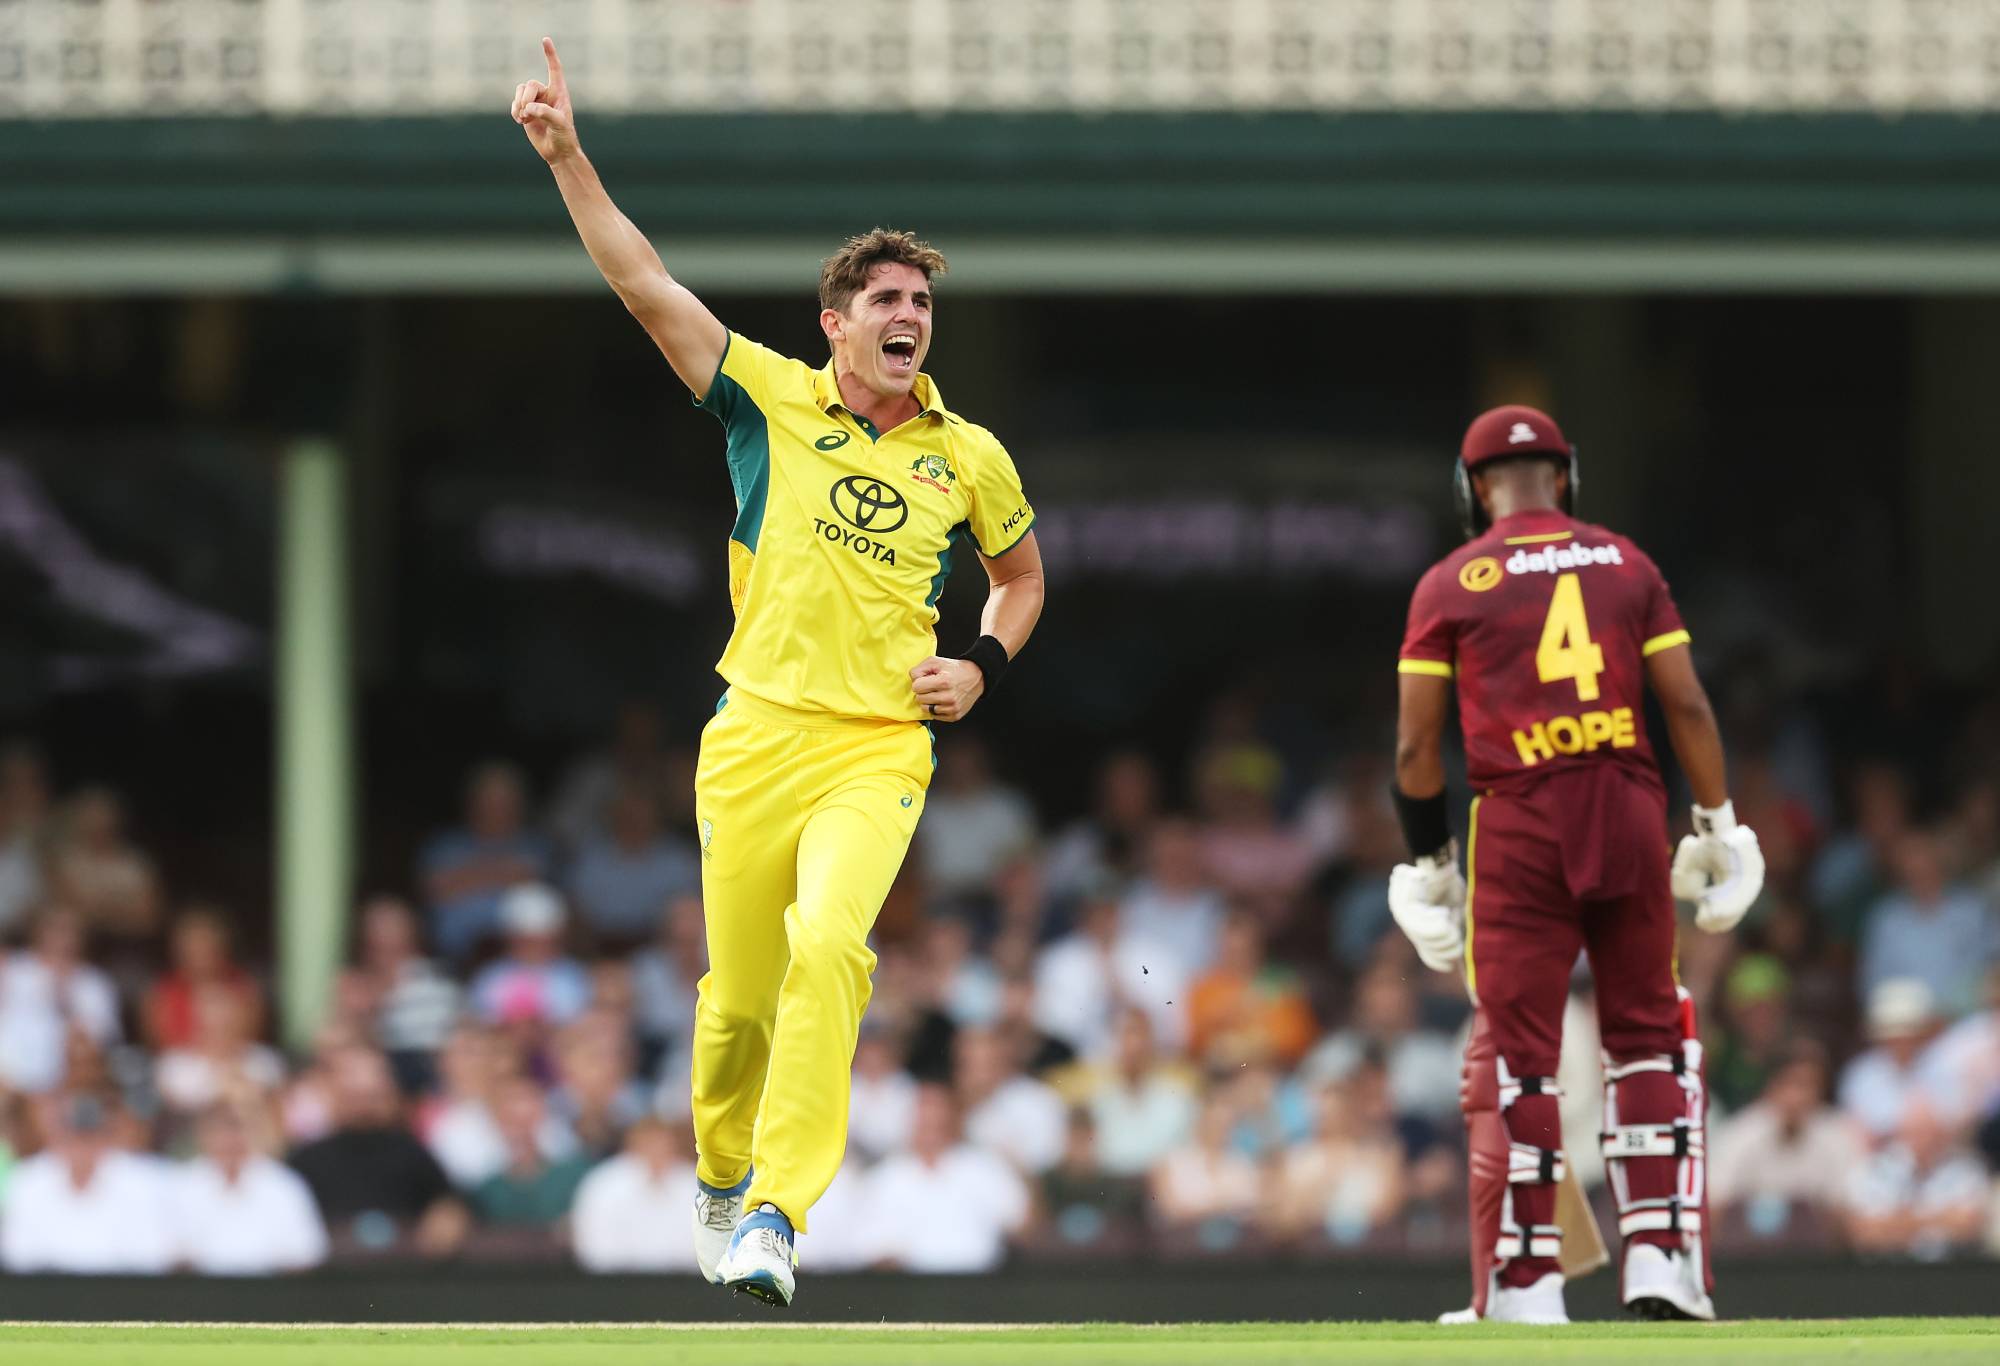 SYDNEY, AUSTRALIA - FEBRUARY 04: Sean Abbott of Australia celebrates taking the wicket of Kjorn Ottley of the West Indies during game two of the Men's One Day International series between Australia and West Indies at Sydney Cricket Ground on February 04, 2024 in Sydney, Australia. (Photo by Matt King/Getty Images)